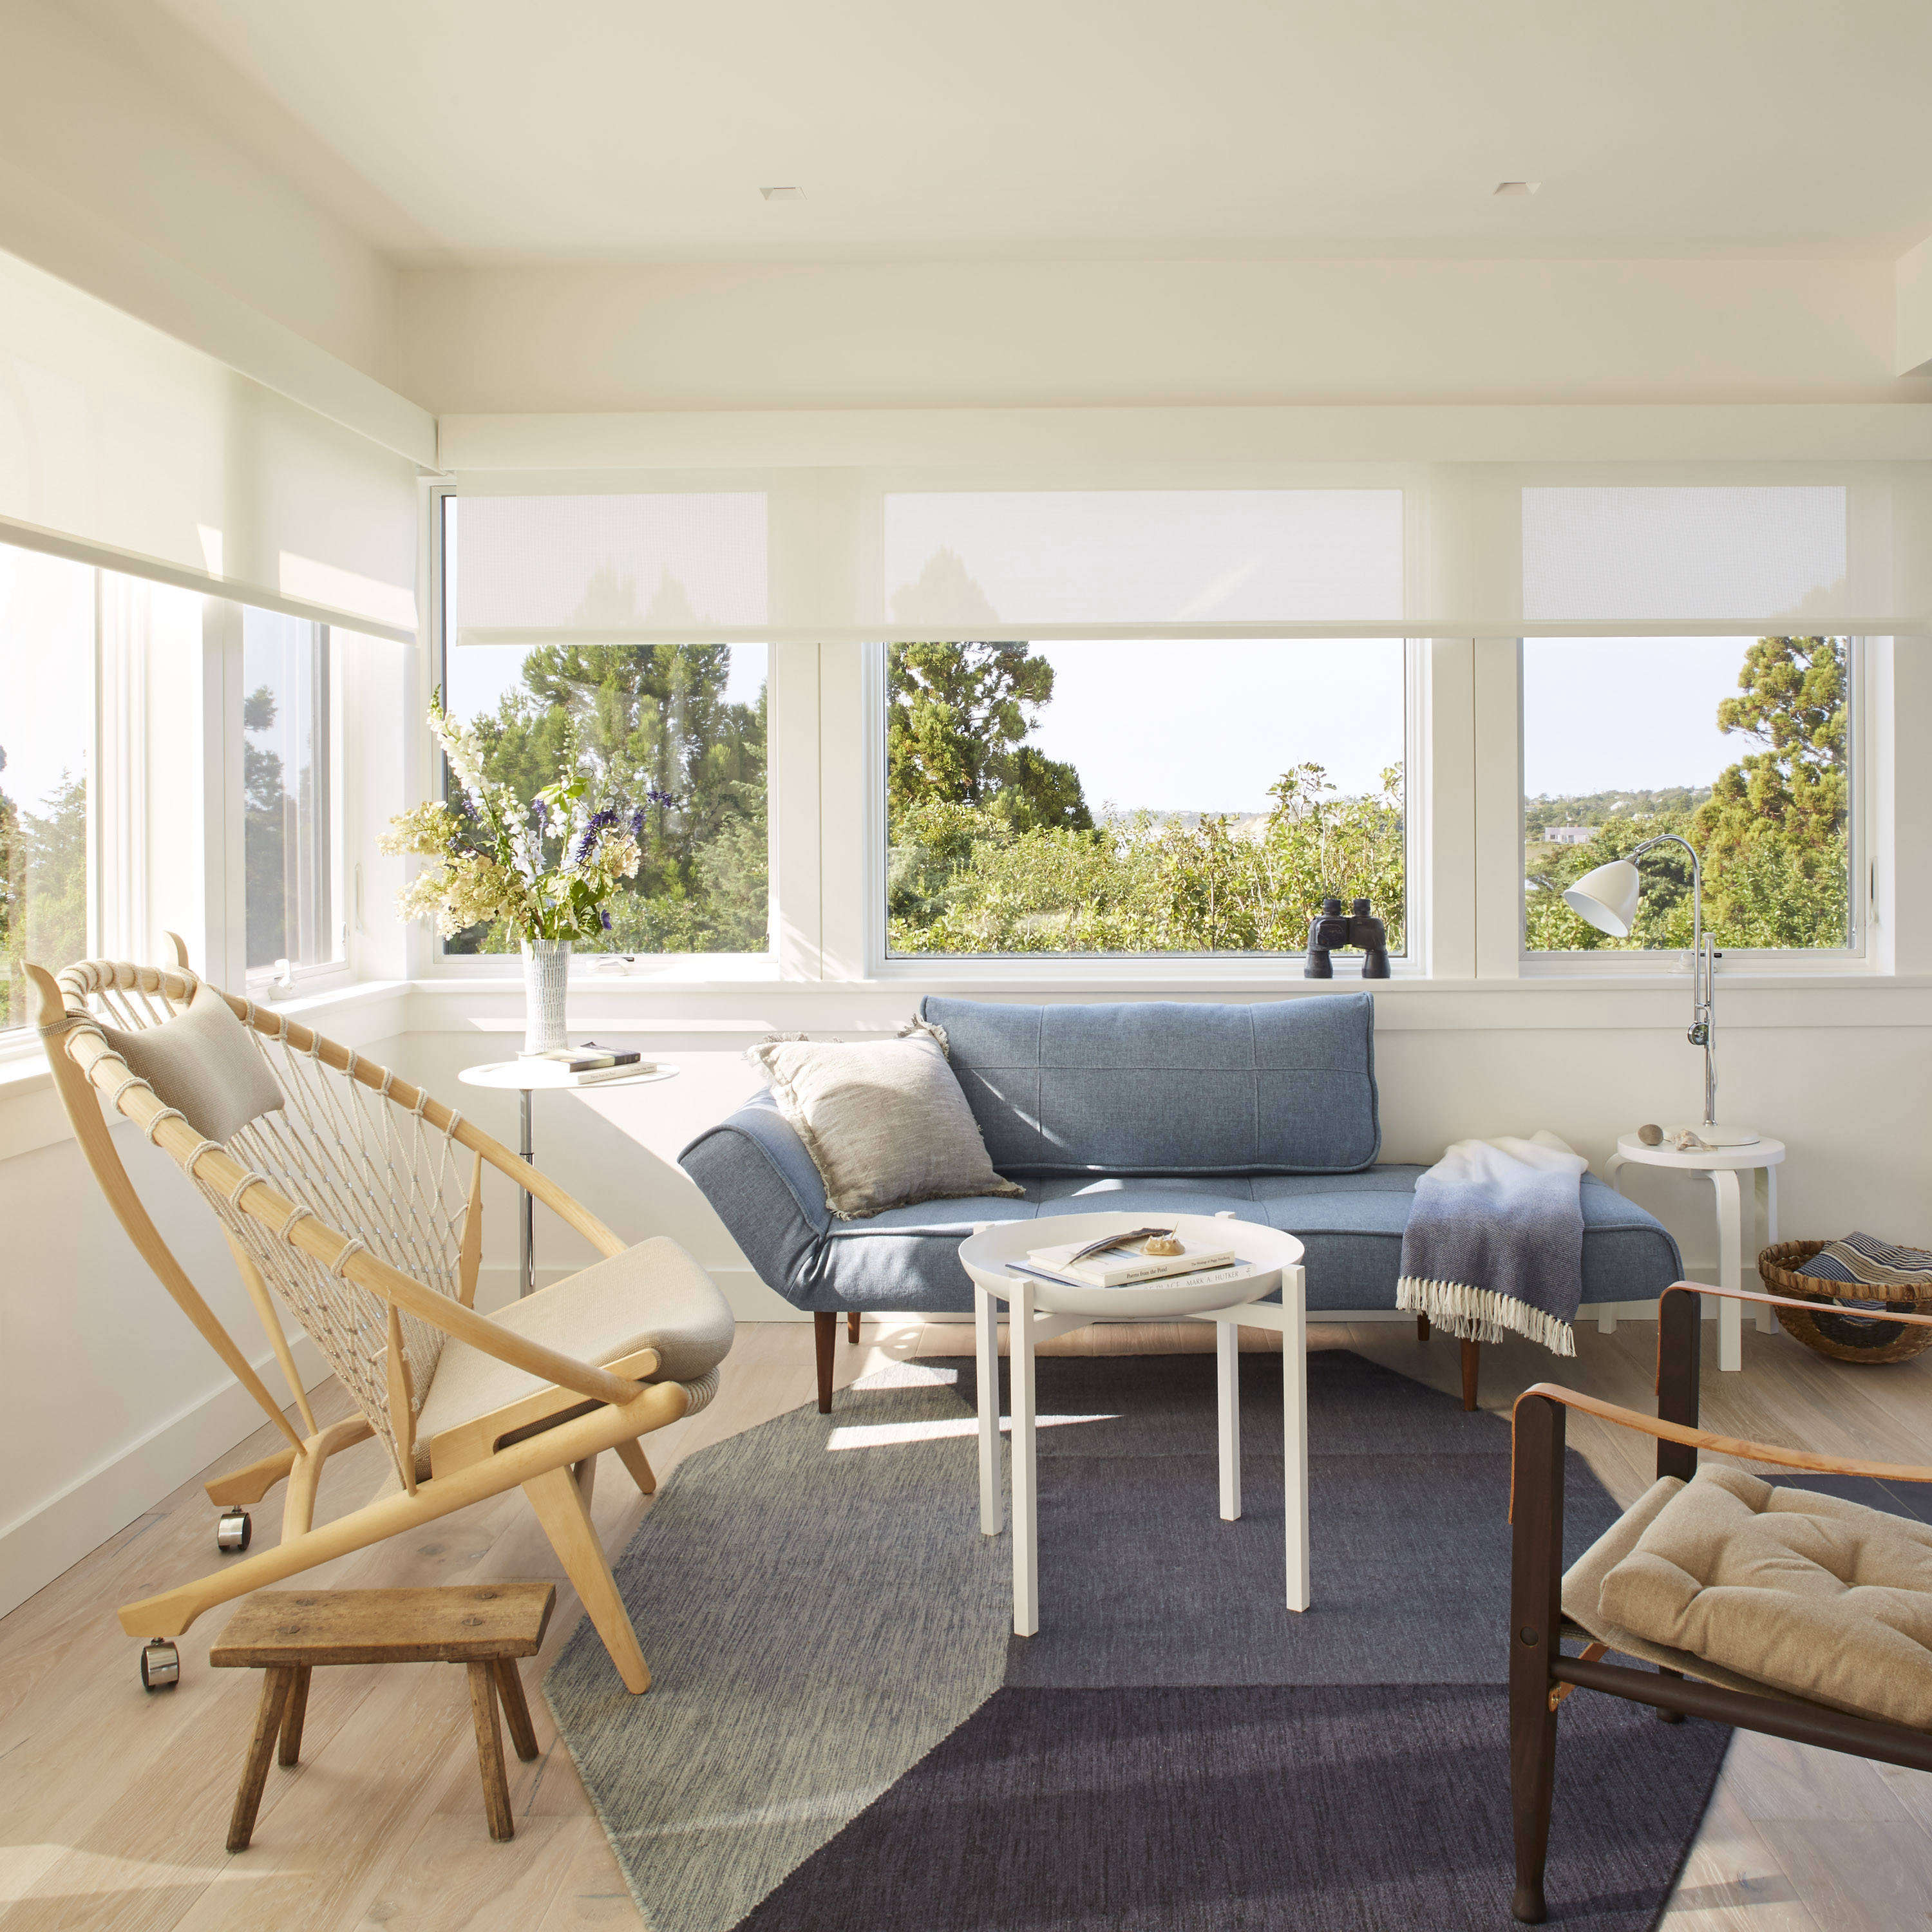 10 Modern Wood Beach Houses from the Remodelista ArchitectDesigner Directory portrait 6